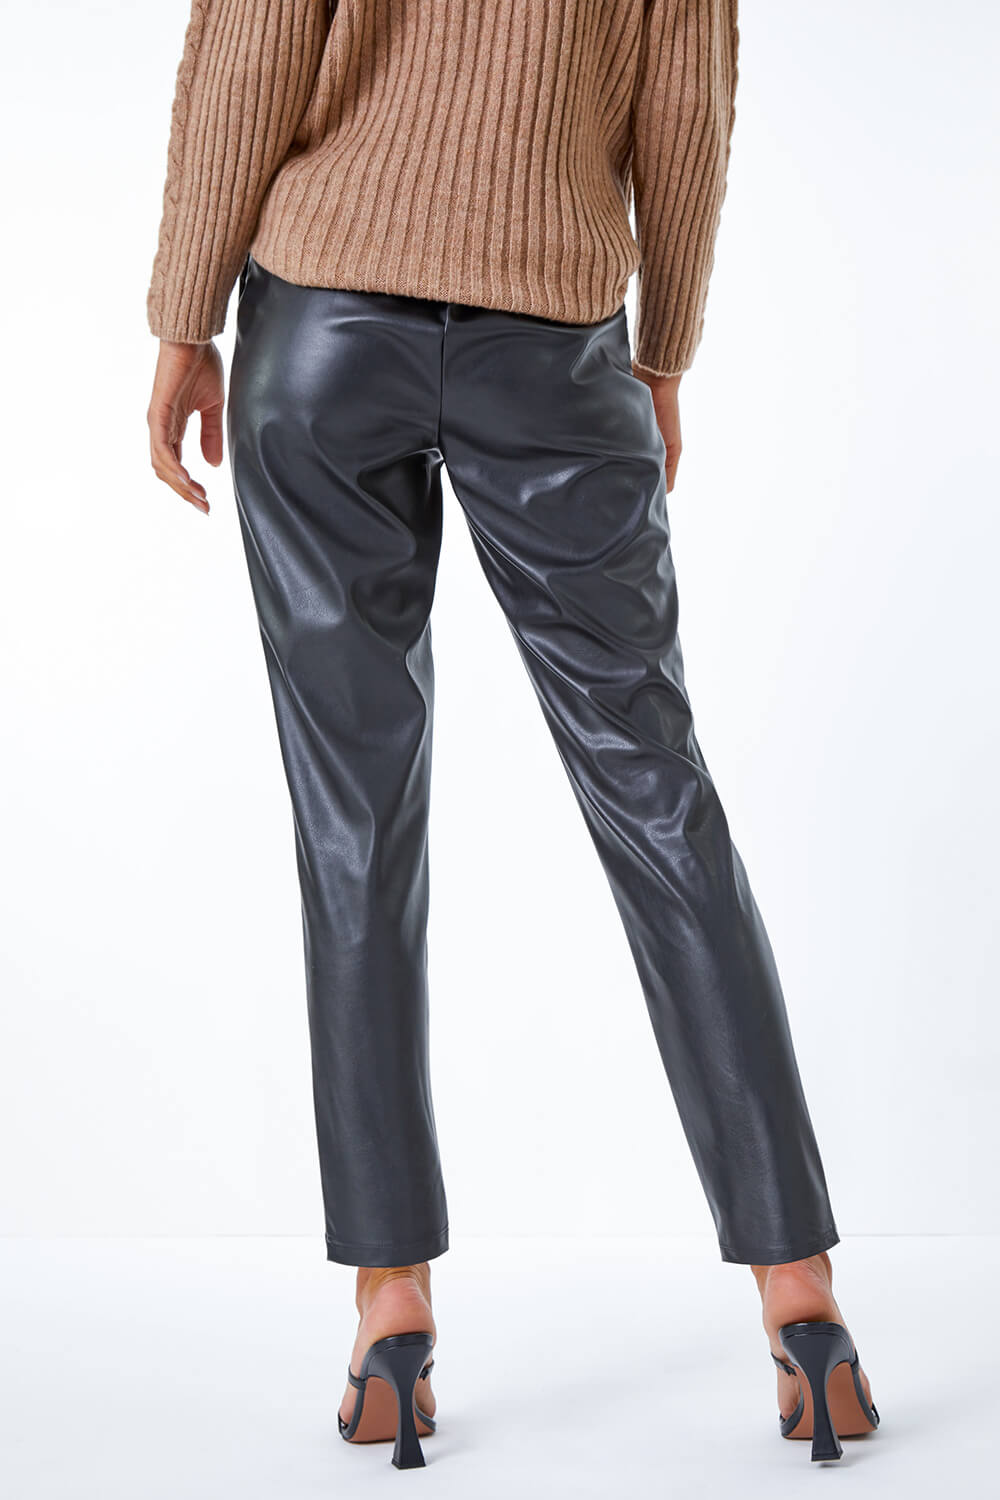 Black Faux Leather Straight Leg Trousers, Image 3 of 5